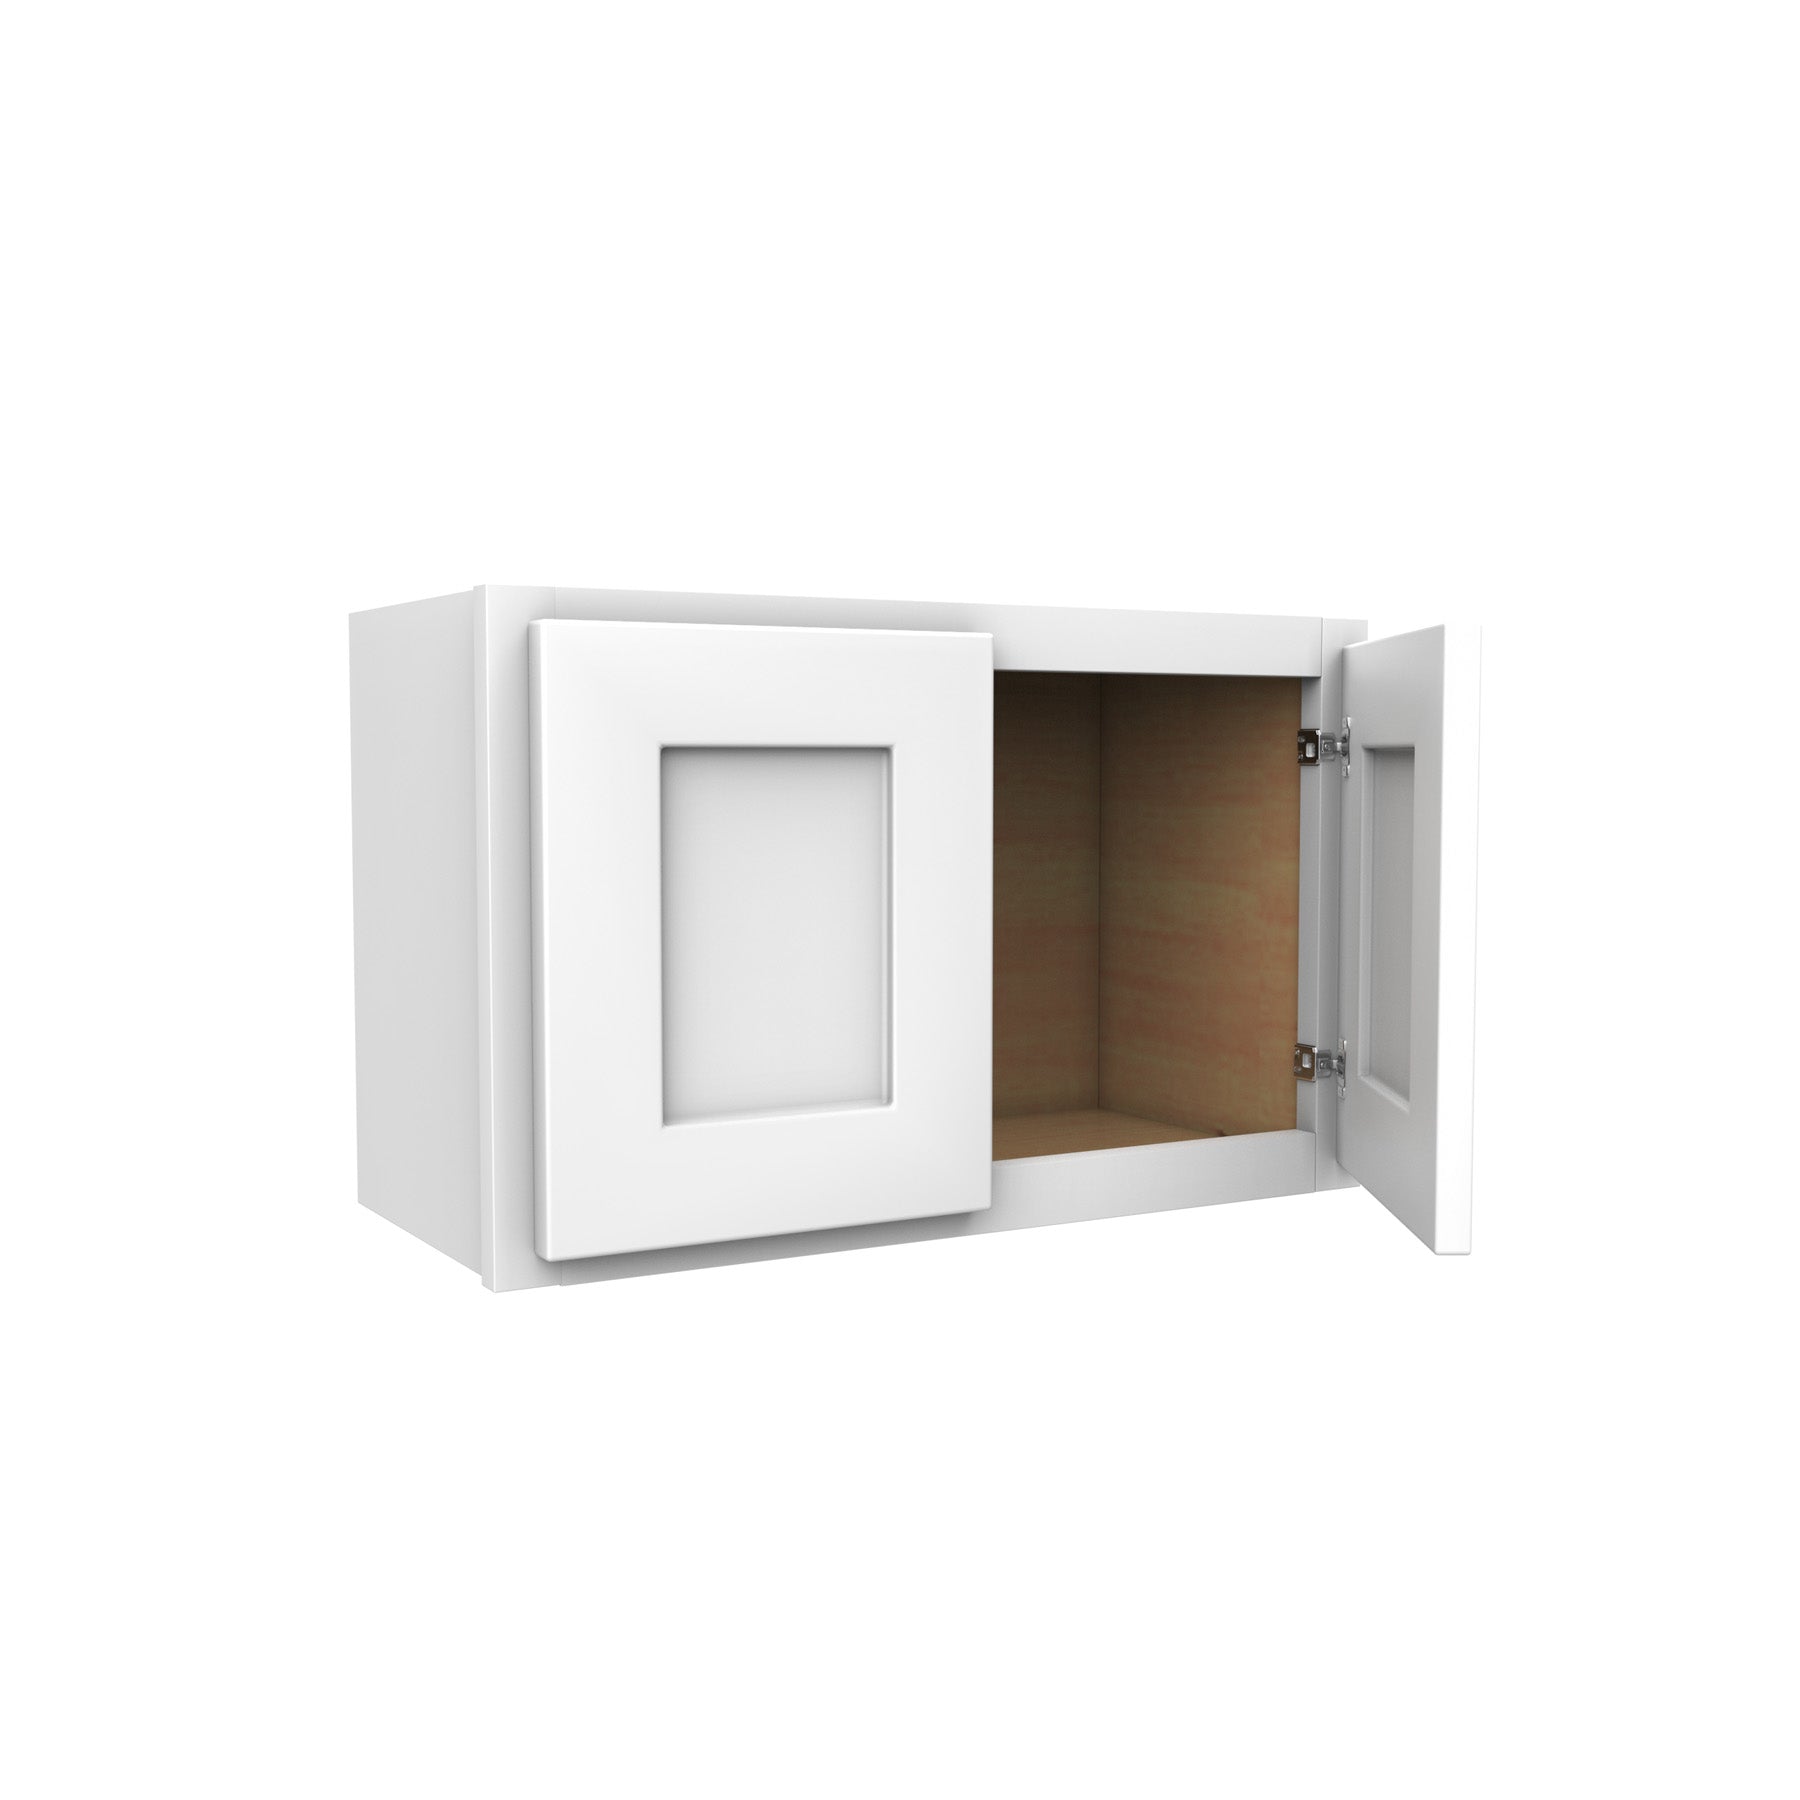 15 Inch High Double Door Wall Cabinet - Luxor White Shaker - Ready To Assemble, 24"W x 15"H x 12"D